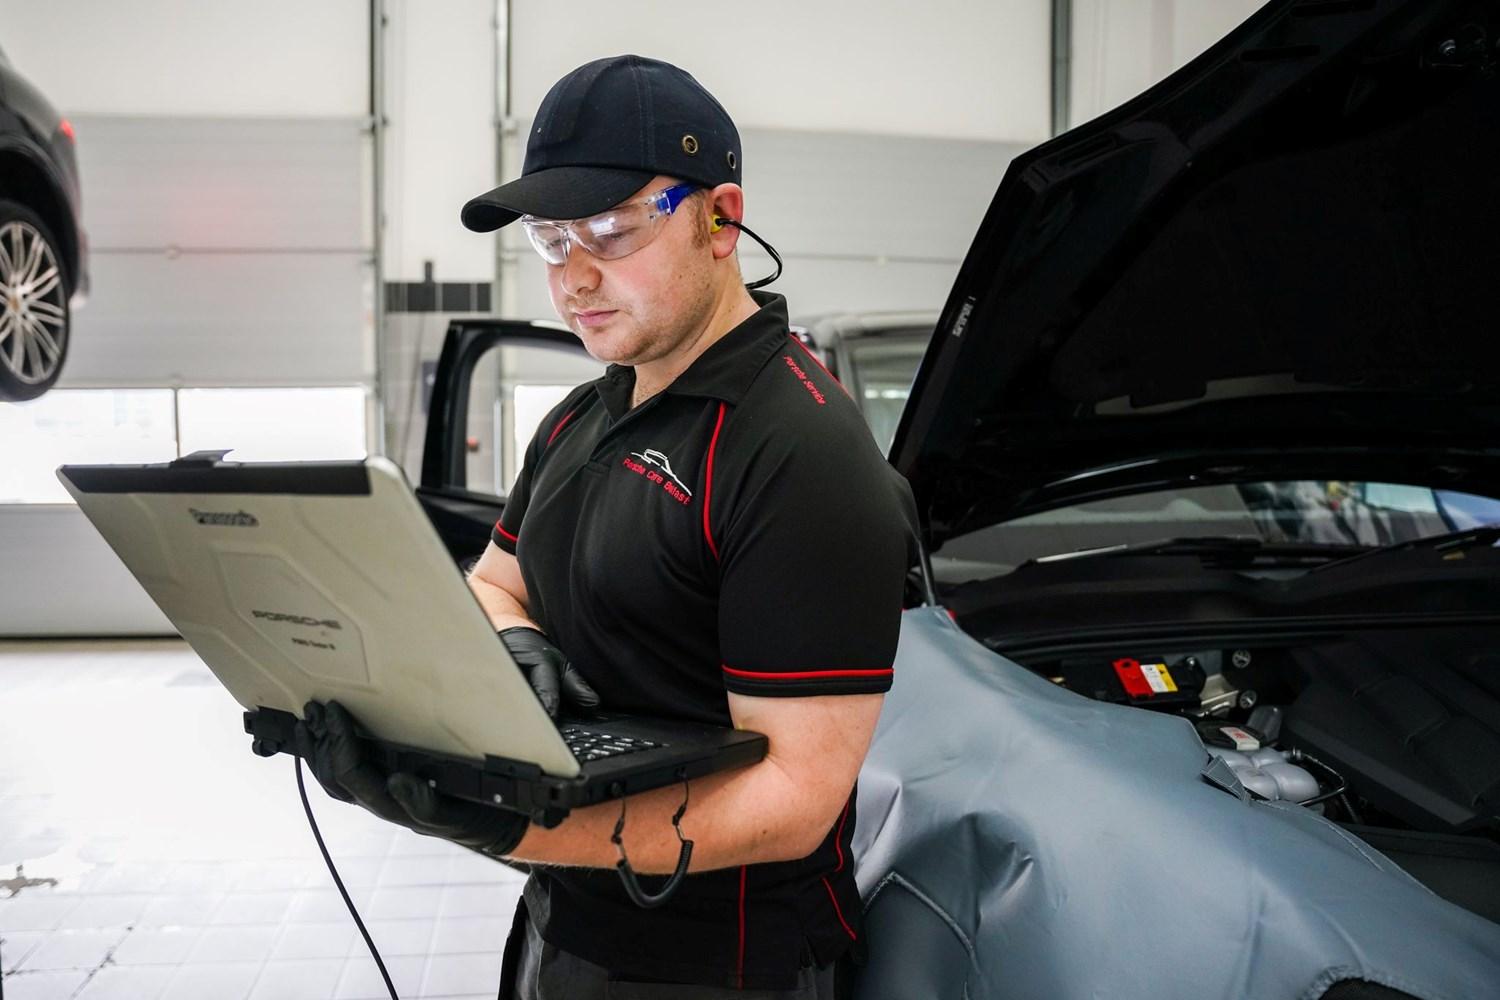 Porsche Repair Specialist reviews laptop for repairs as Porsche vehicle is behind with the hood raised.